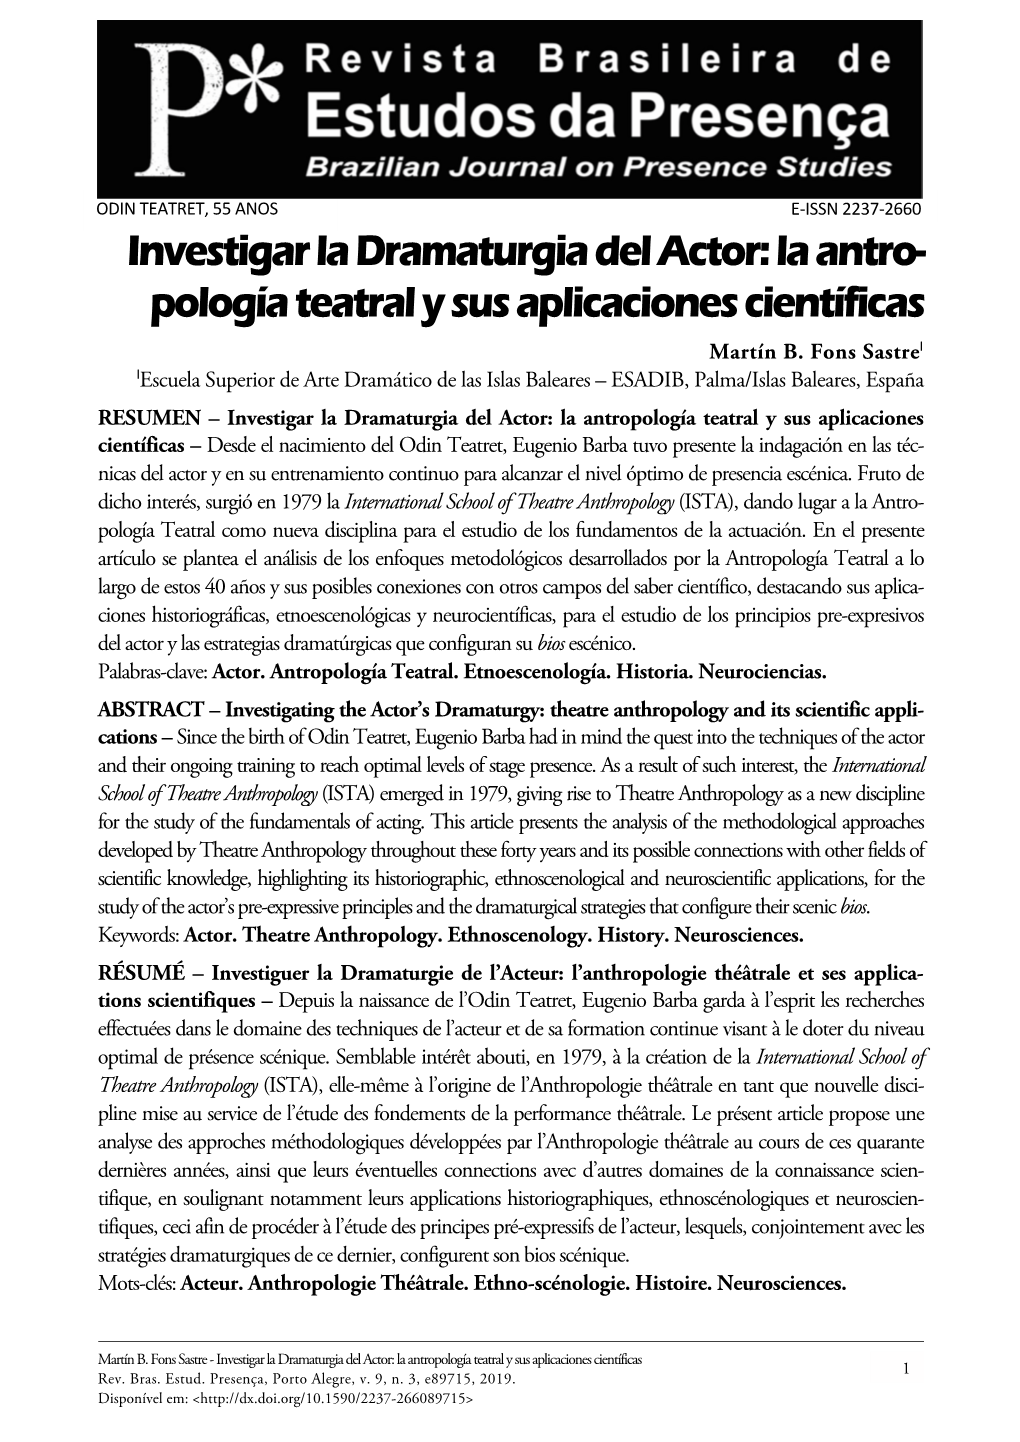 Investigating the Actor's Dramaturgy: Theatre Anthropology and Its